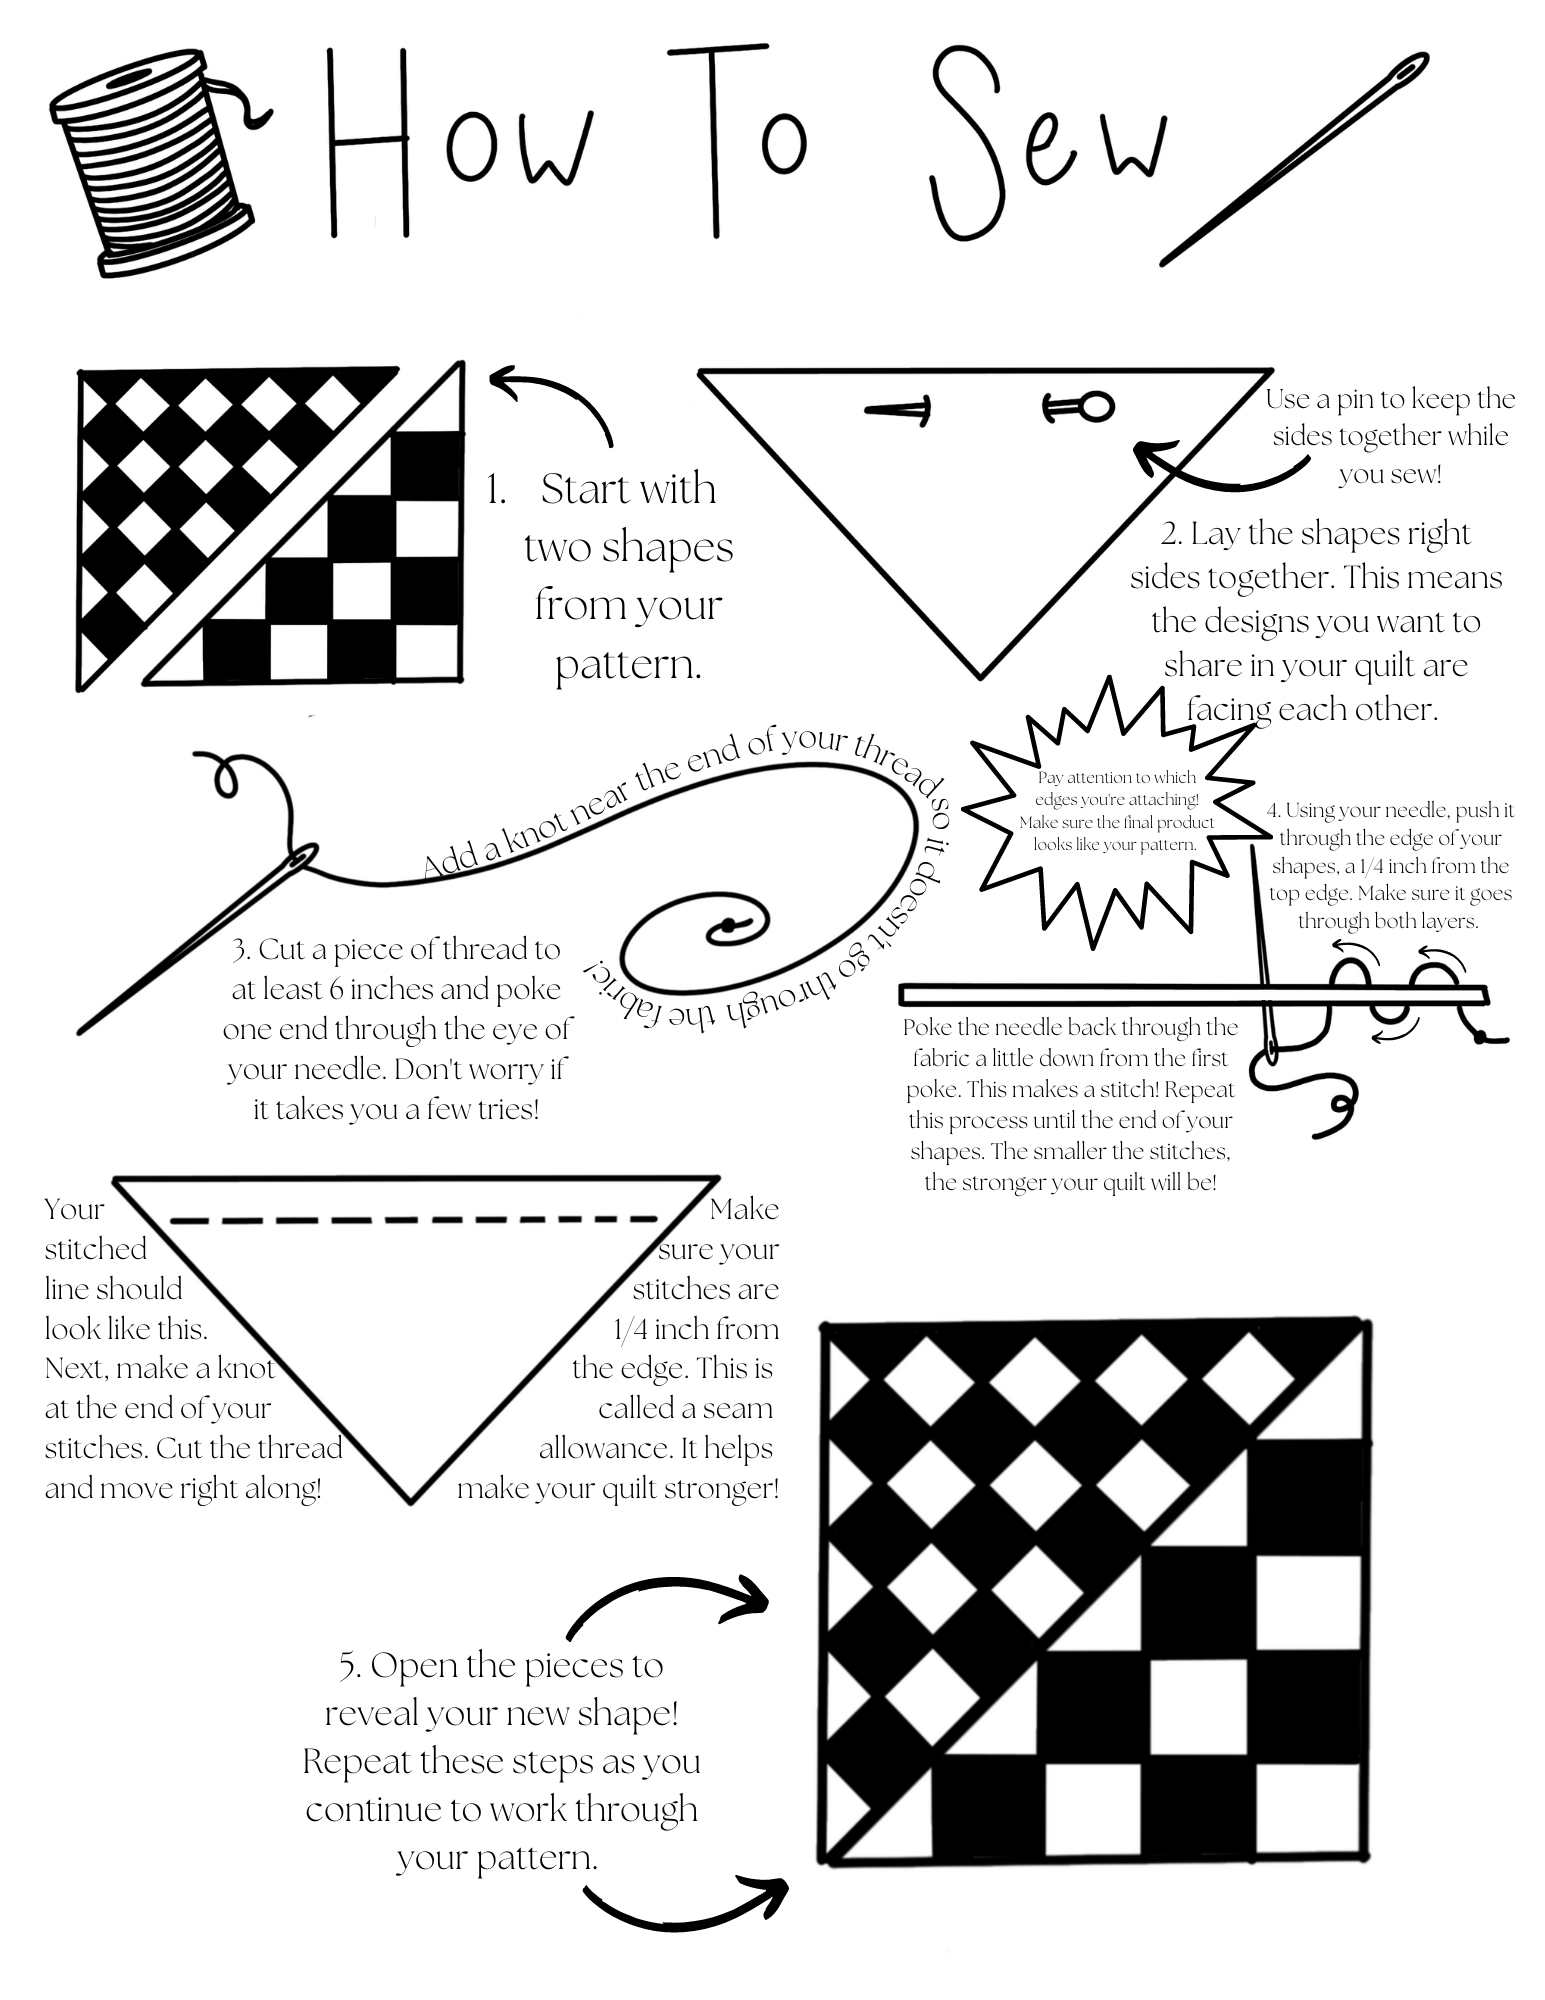 Instructional Handout for students in grades 6th through 8th / Instructional Handout for students in grades 6th through 8th grade to learn about stitching and sewing together fabric. 